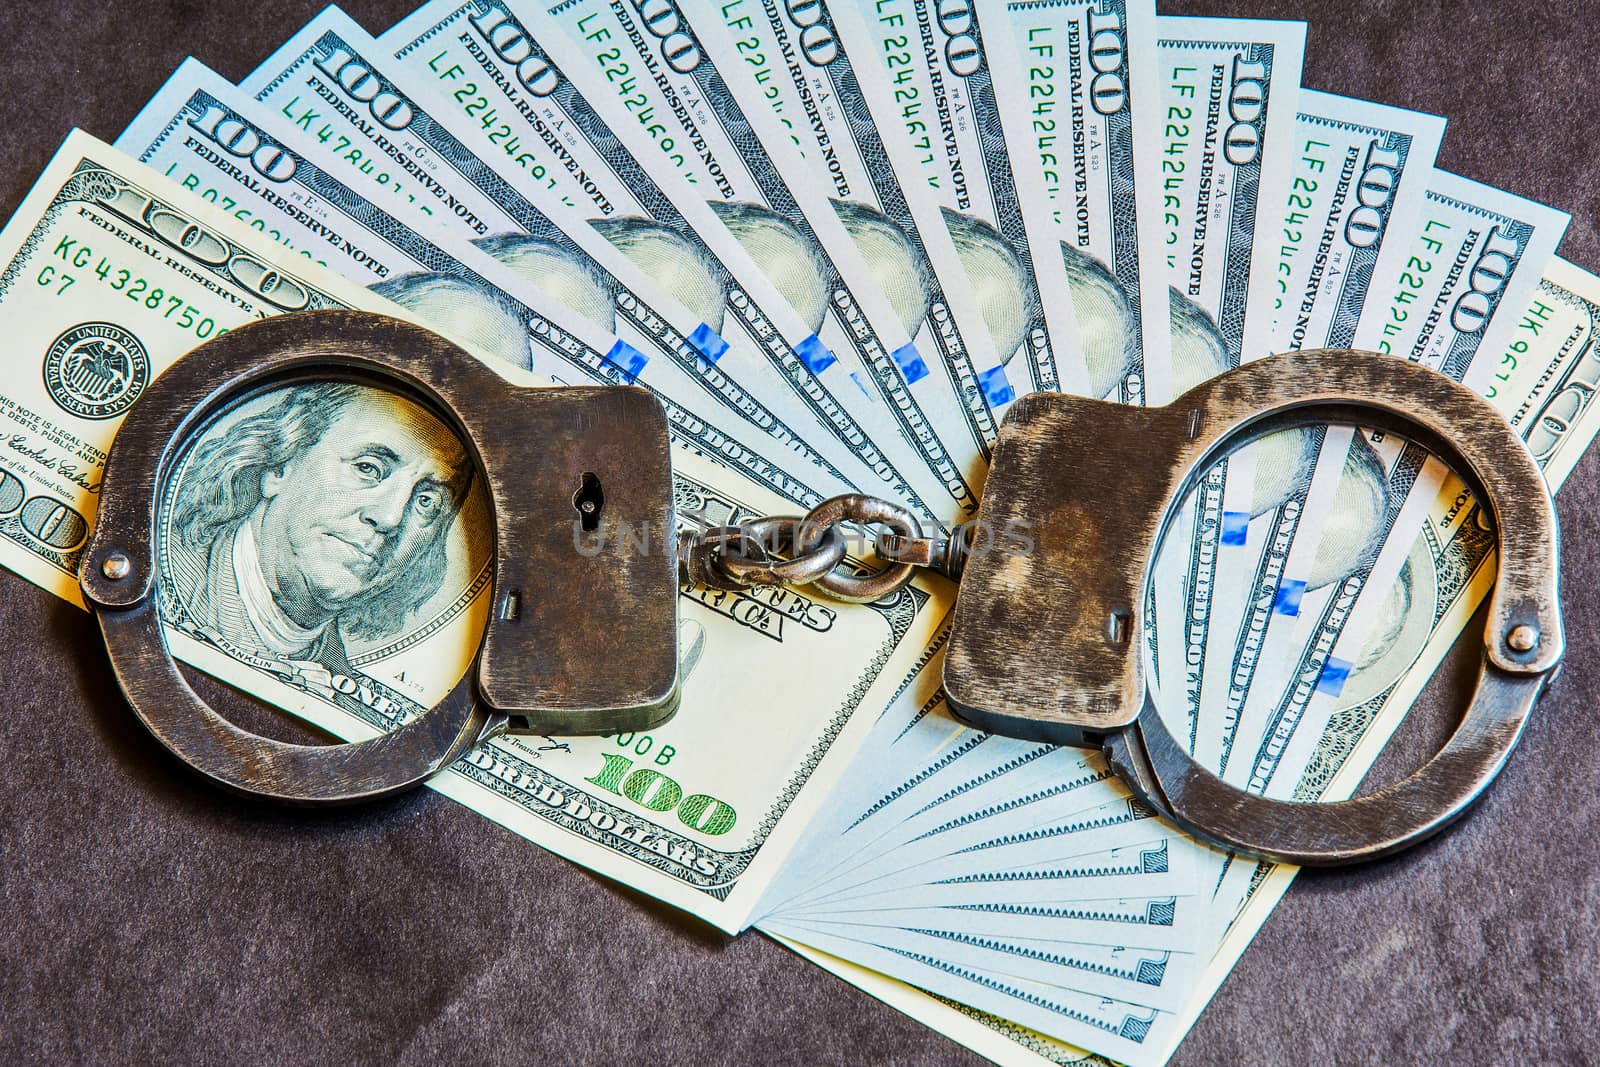 Metal handcuffs on the US currency bills

